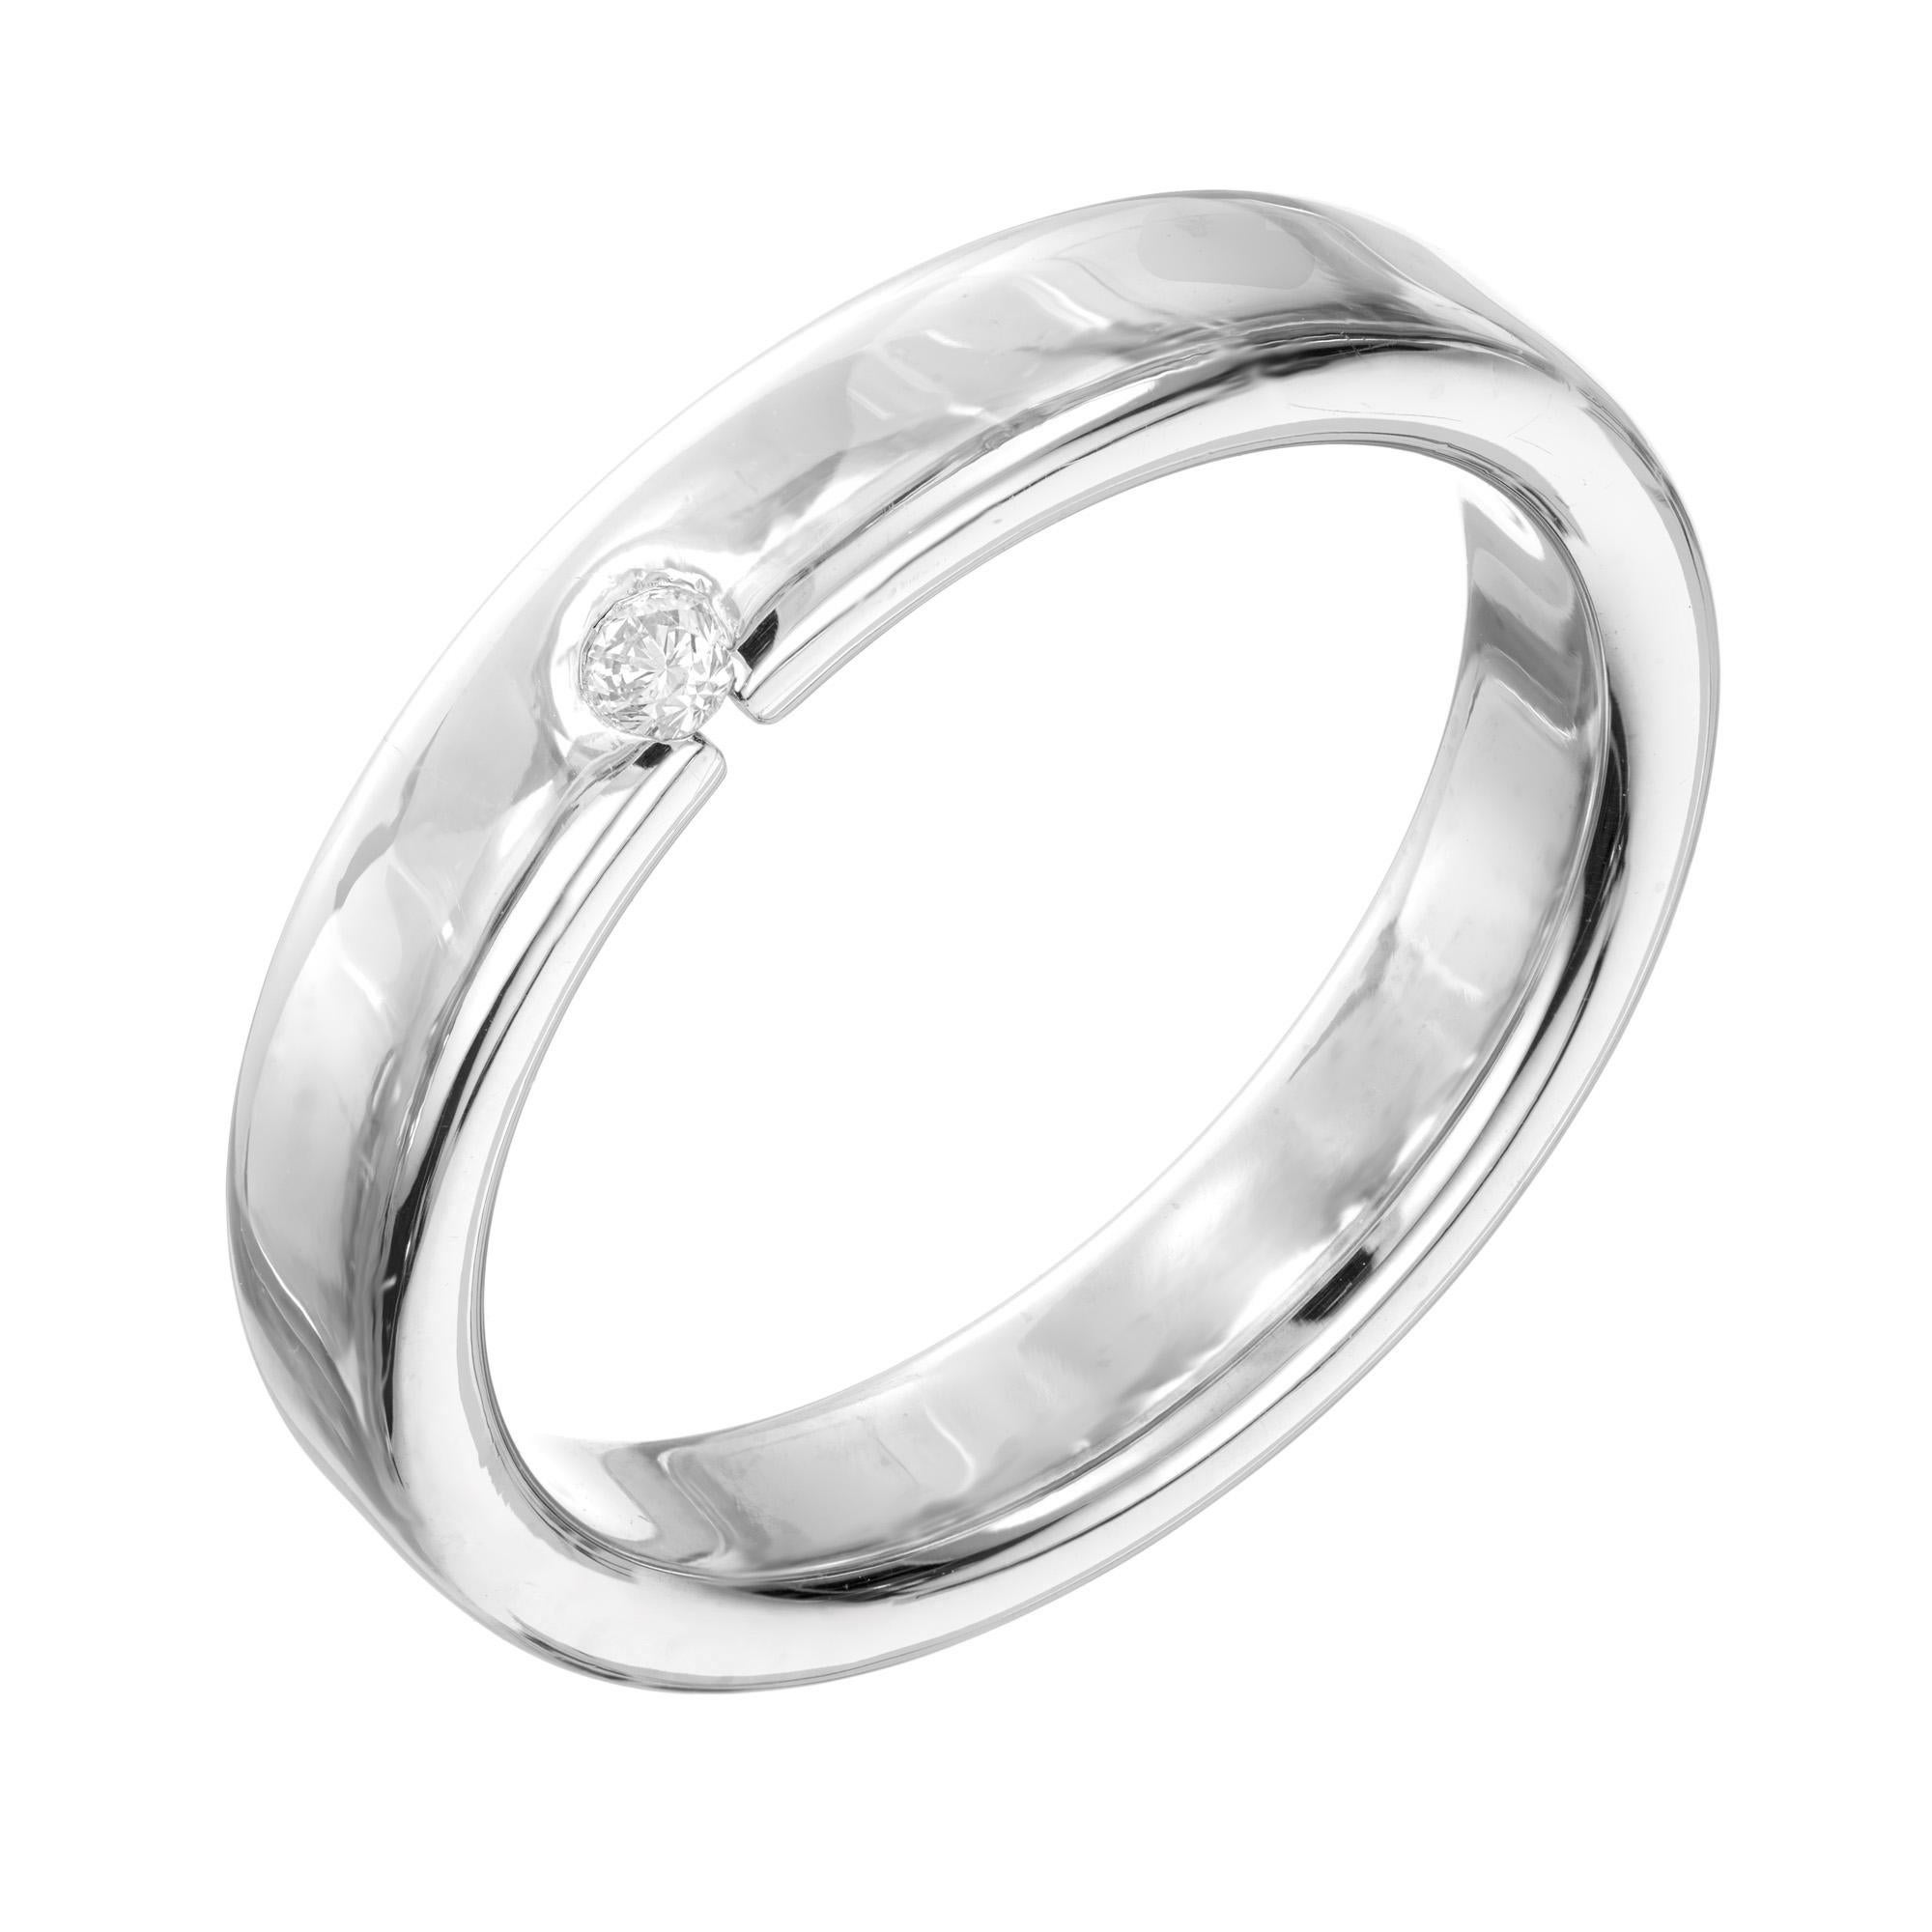 Simple low dome men's diamond wedding band ring. 1 round brilliant cut diamond set in a 4.5mm solid platinum band with a single securely set diamond. Round edges for comfort. 

1 round brilliant cut diamond, H VS approx. .5cts
Size 9.5 and